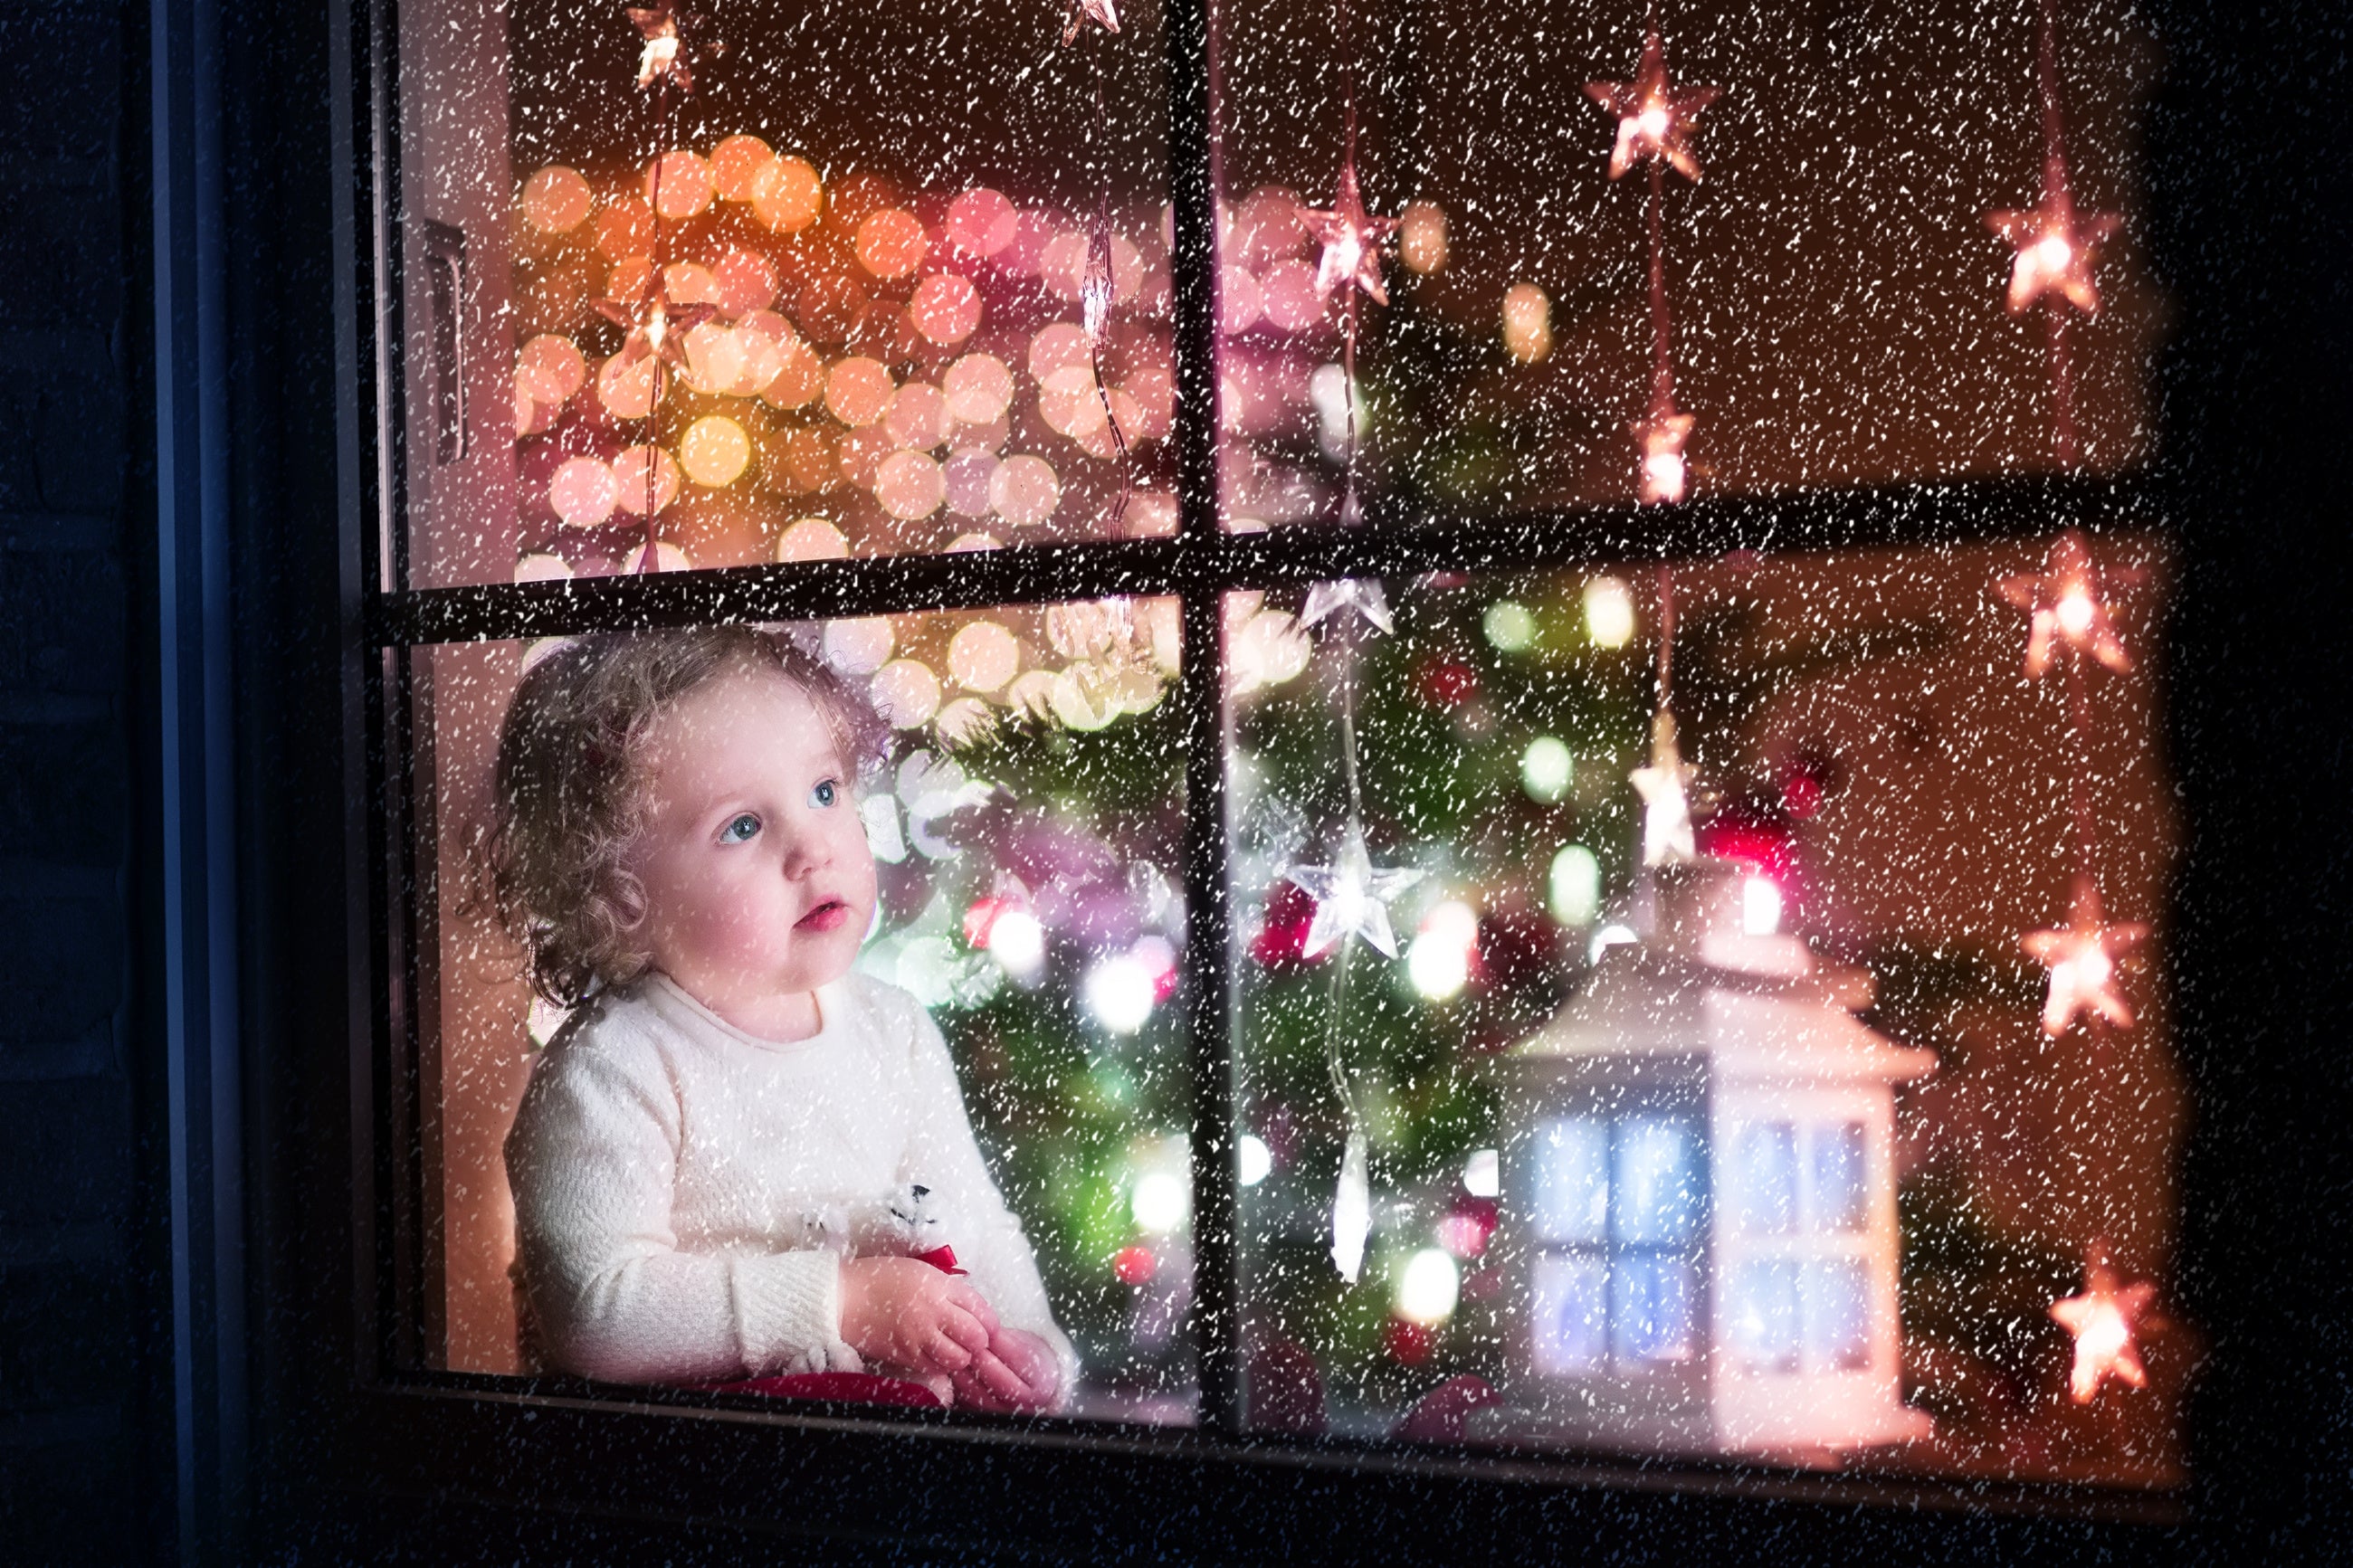 Young child looking out the window at snow on Christmas Eve - example of holiday photography